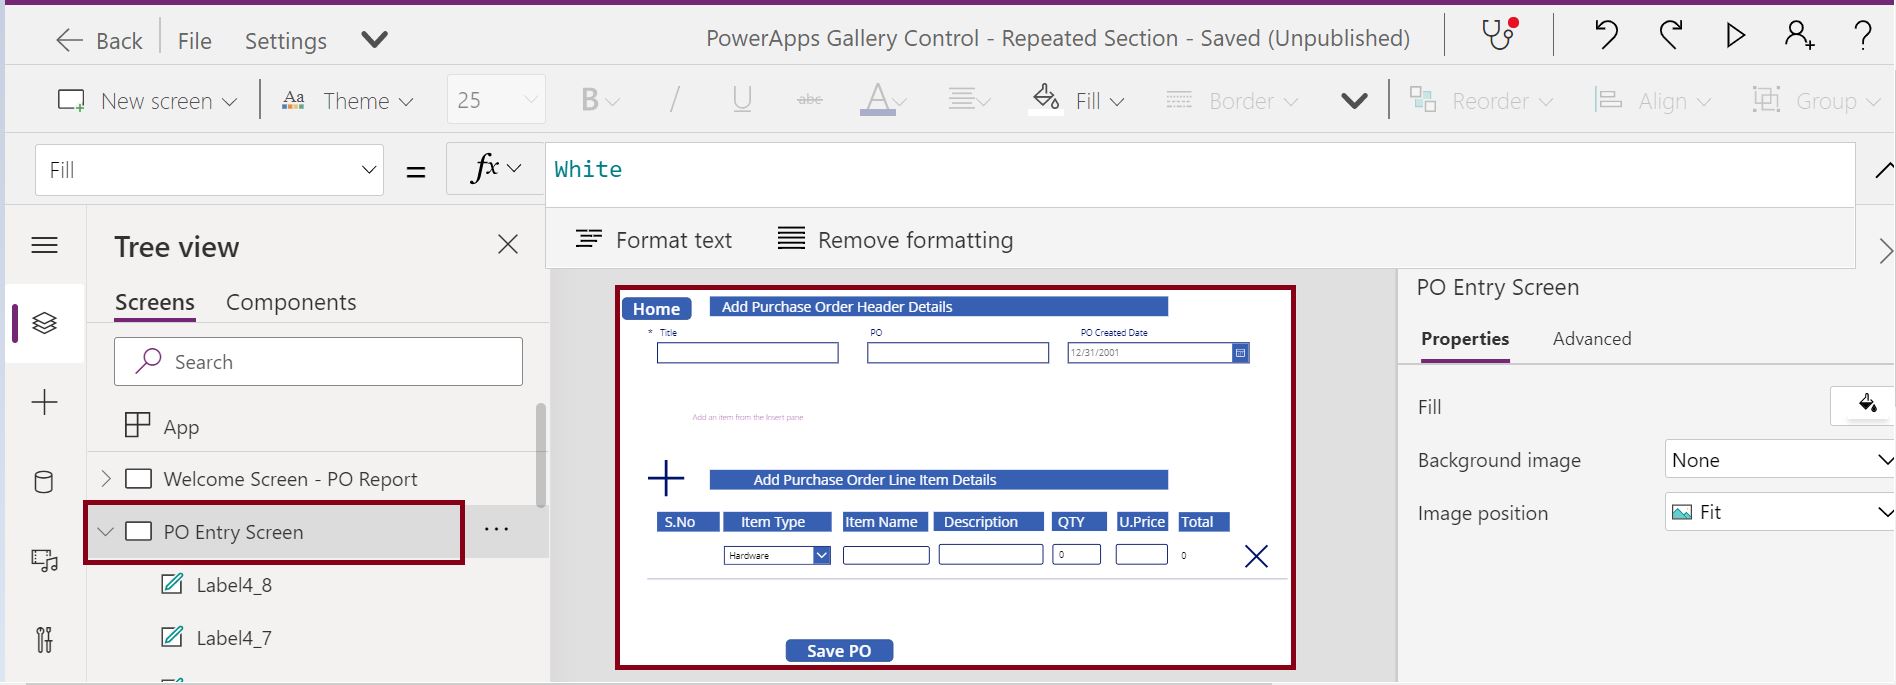 Purchase order table design in PowerApps 